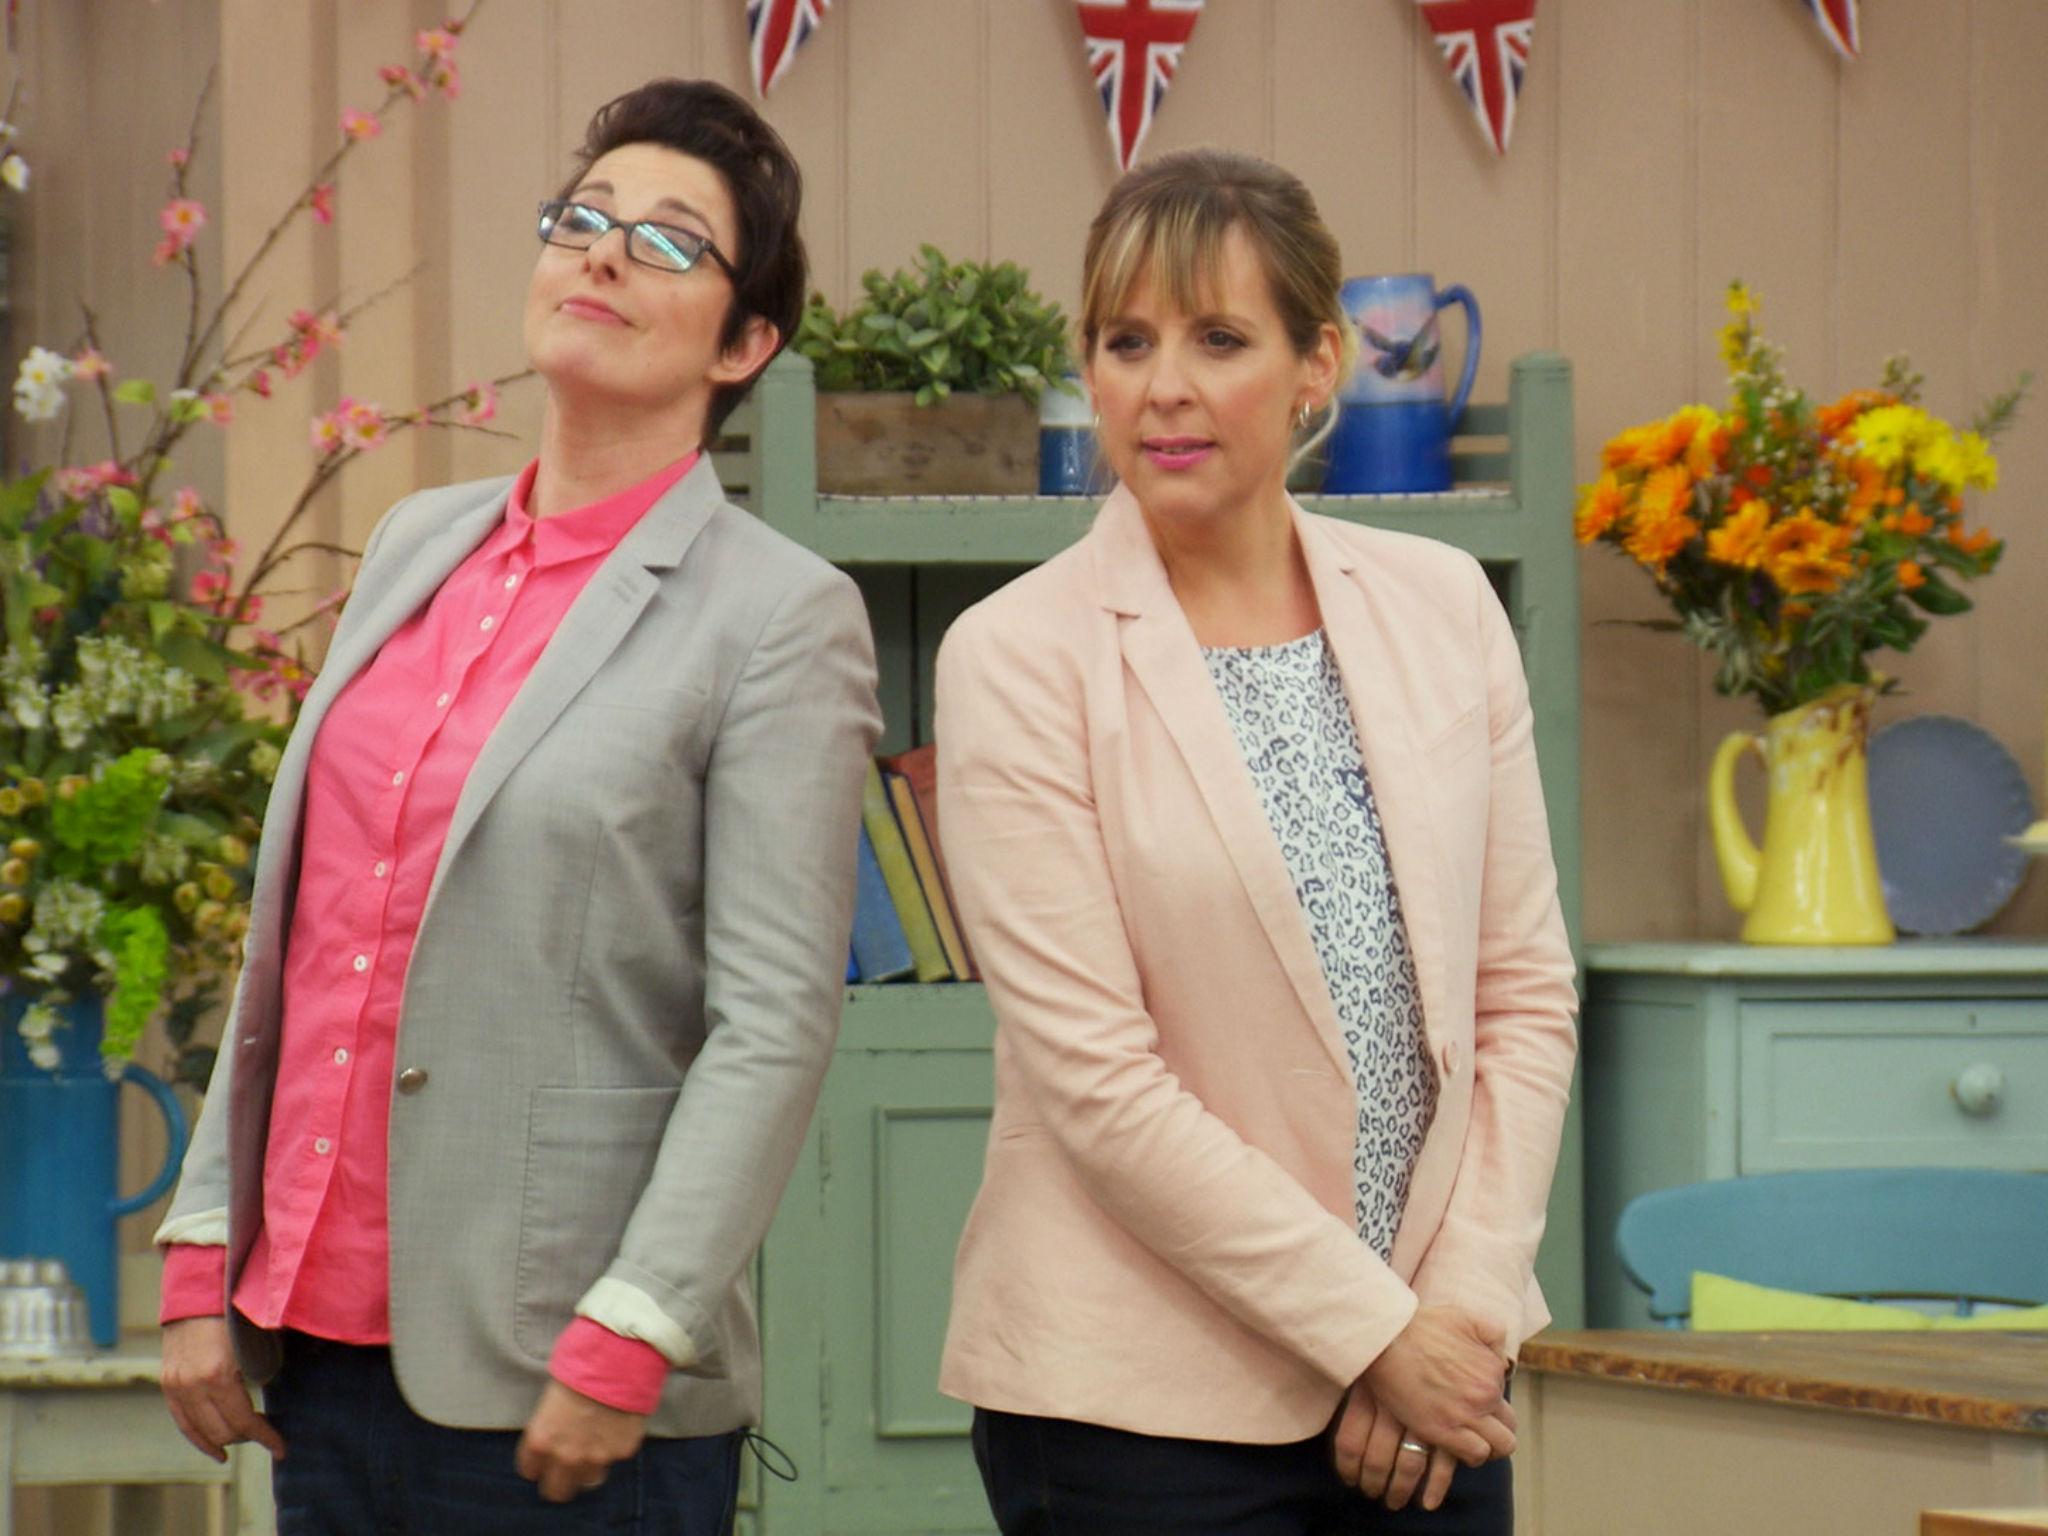 Mel Giedroyc and Sue Perkins host The Great British Bake Off on BBC One